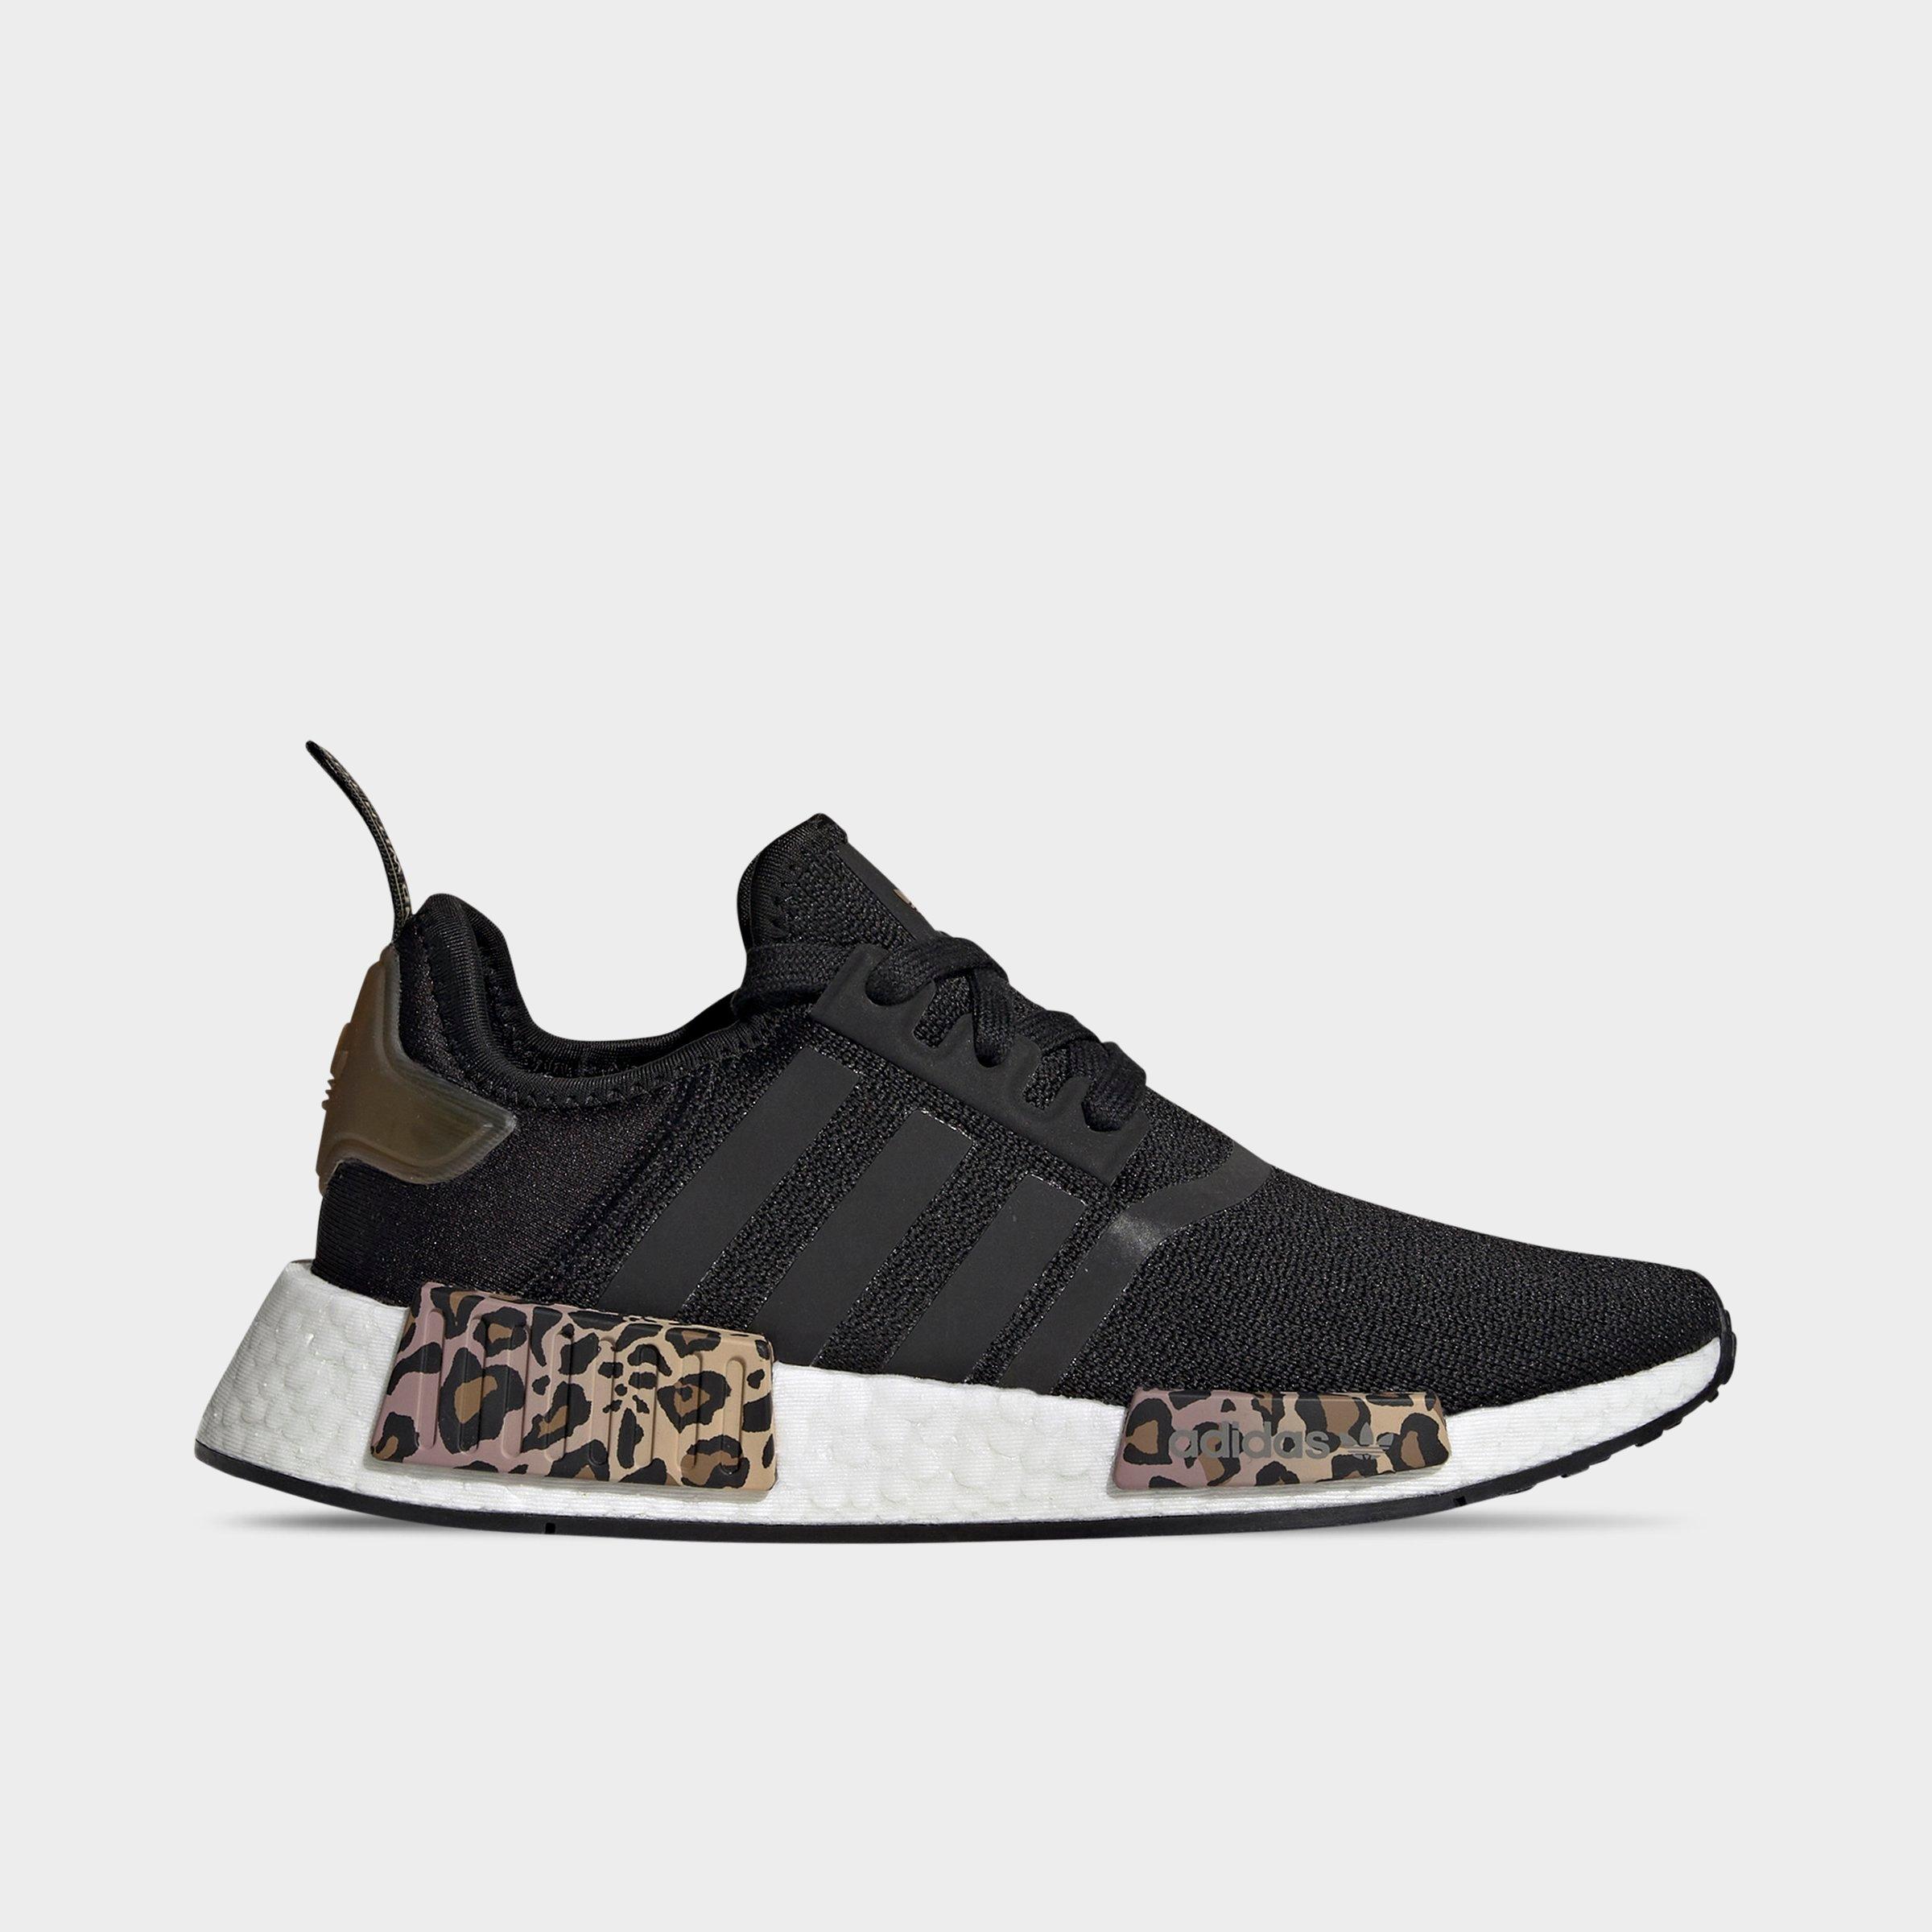 nmd_r1 women's shoes